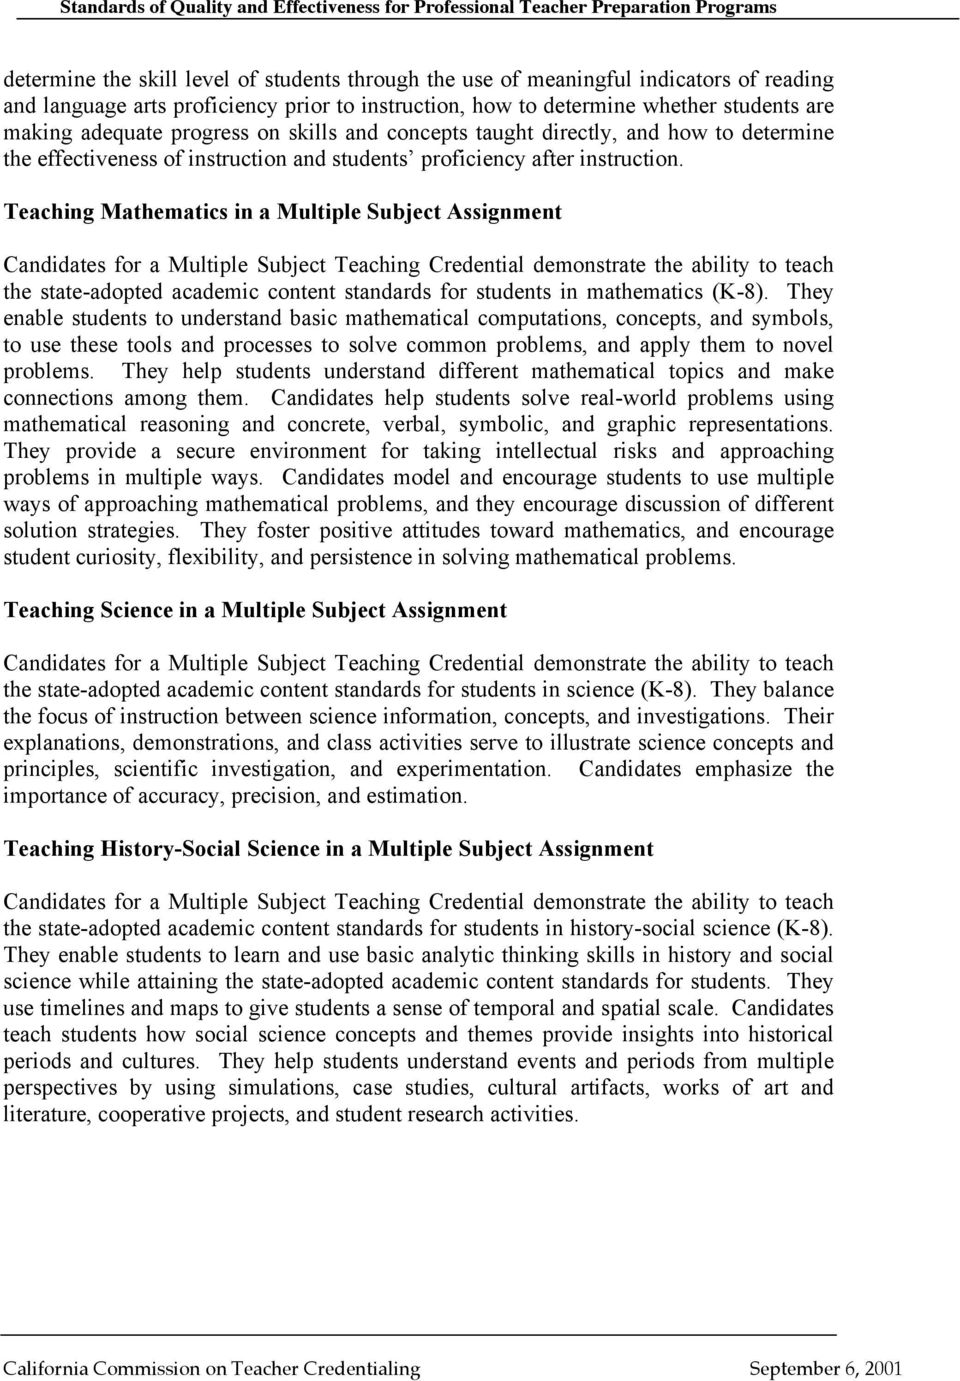 Teaching Mathematics in a Multiple Subject Assignment Candidates for a Multiple Subject Teaching Credential demonstrate the ability to teach the state-adopted academic content standards for students